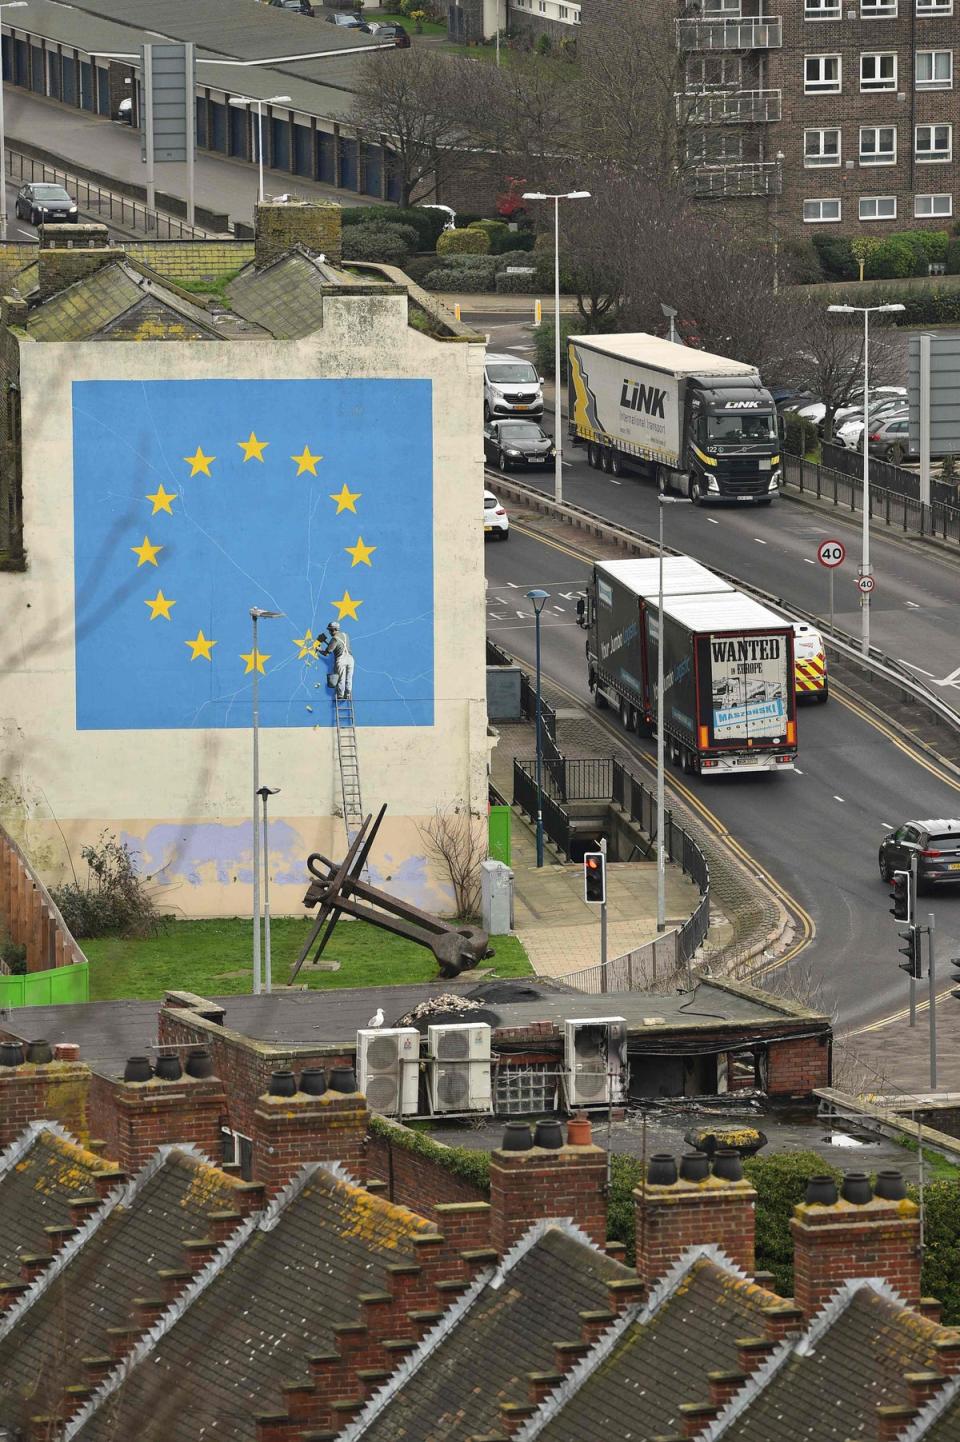 The artwork appeared in the coastal town a year after the UK voted to leave the EU (AFP/Getty Images)